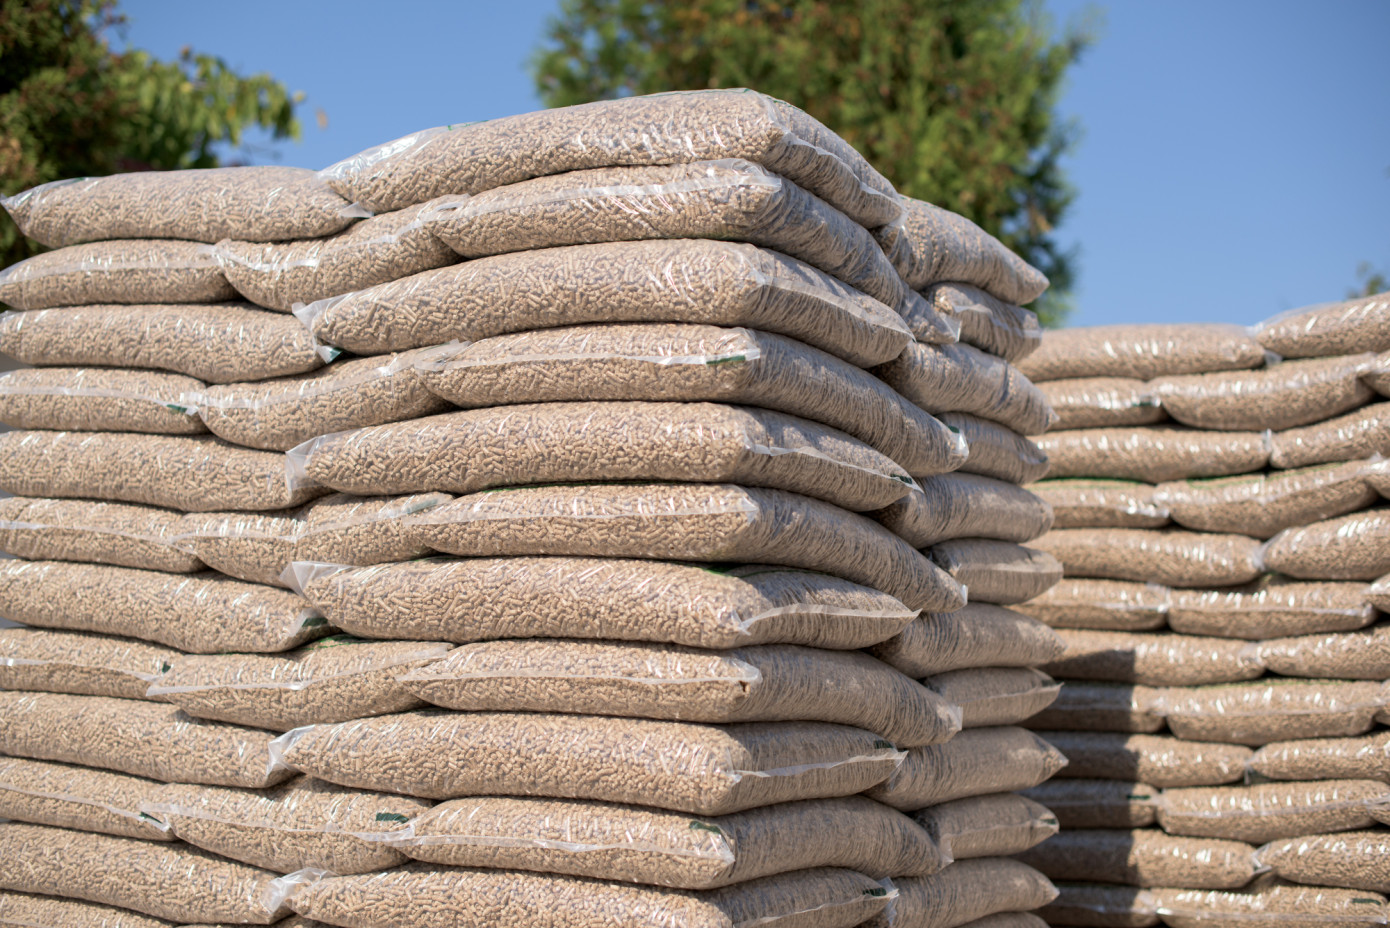 Exports of wood pellets from Vietnam to Japan jump 63% in March